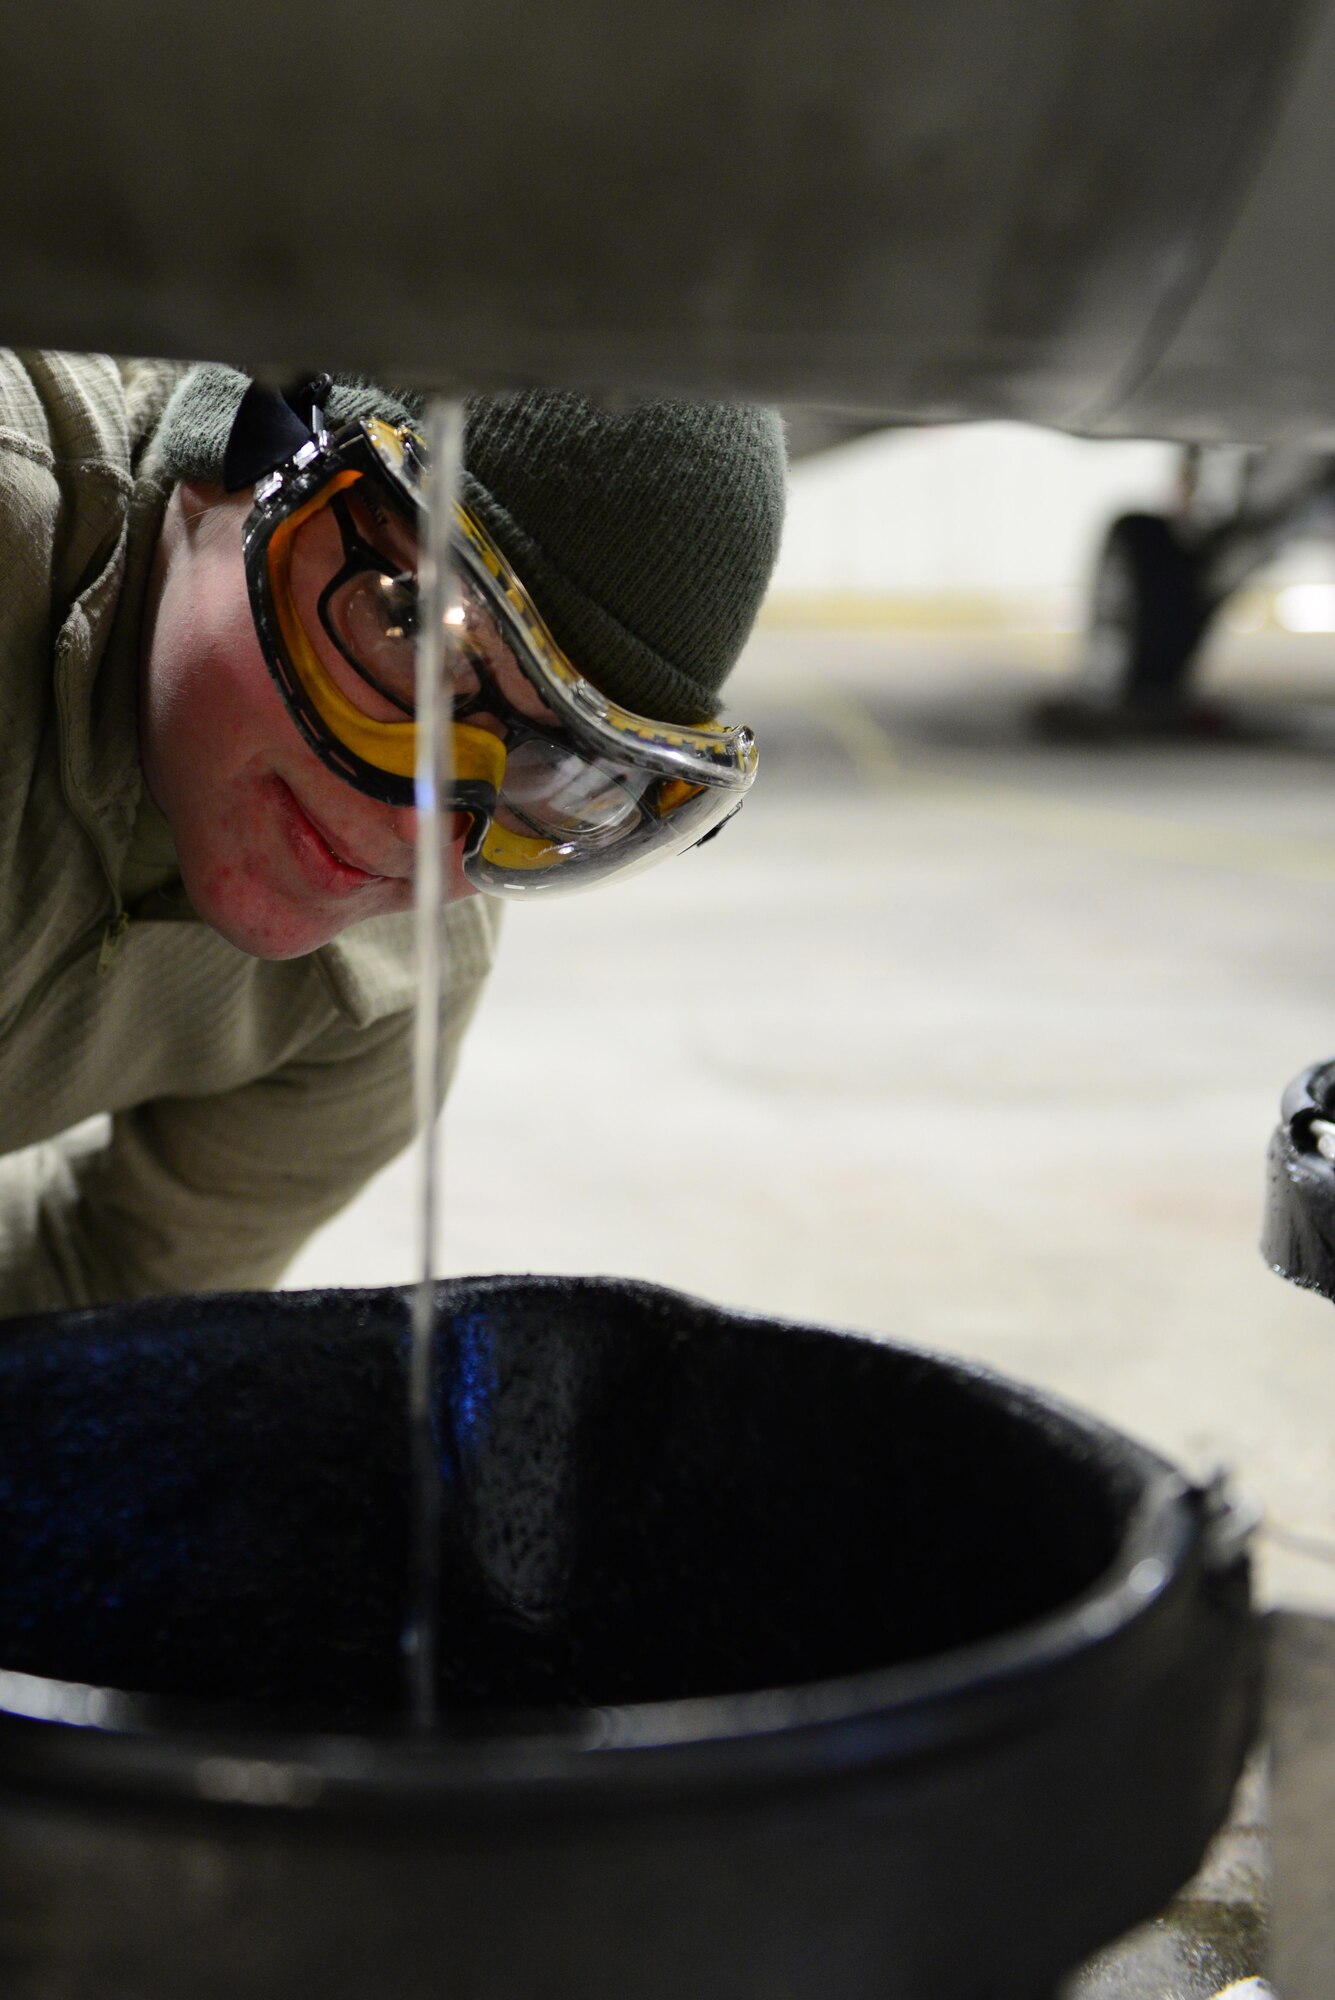 U.S. Air Force Senior Airman Jerri Addison, a 354th Aircraft Maintenance Squadron crew chief, watches fuel empty from an F-16 Fighting Falcon fuel tank into a bucket Nov. 22, 2016, at Eielson Air Force Base Alaska. The fuel was emptied into buckets and moved to another tank to be reused later. (U.S. Air Force photo by Airman Eric M. Fisher)